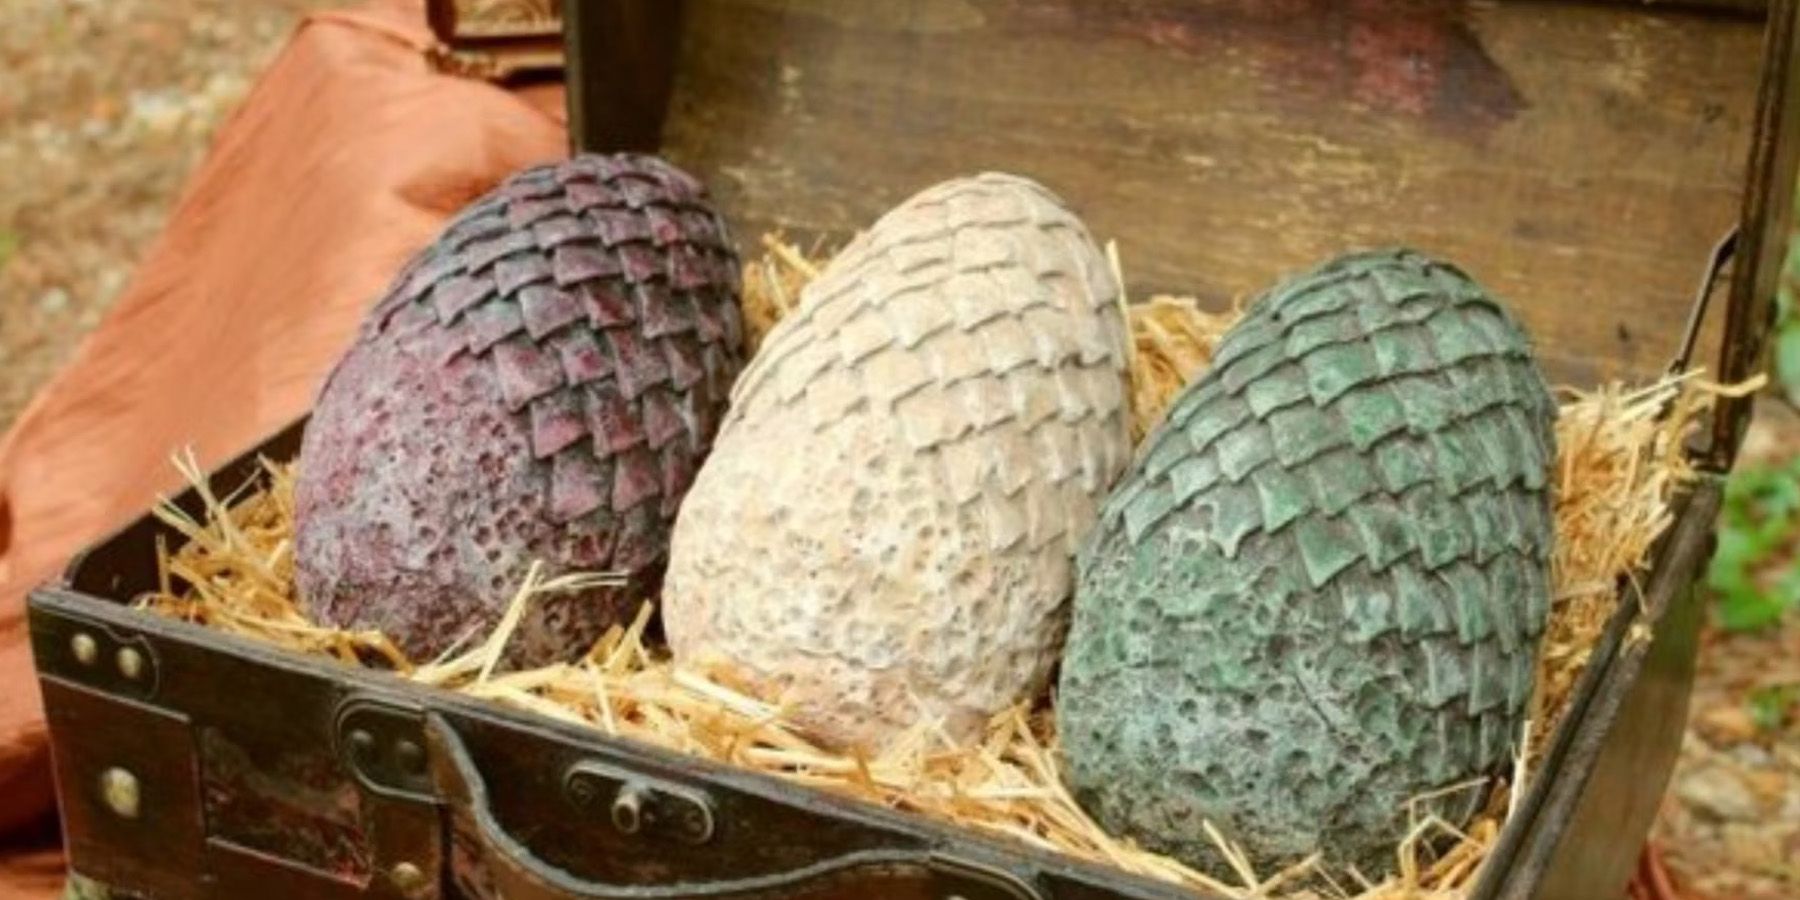 Daenerys Receiving The Eggs Of Drogon, Viserion, and Rhaegal cropped